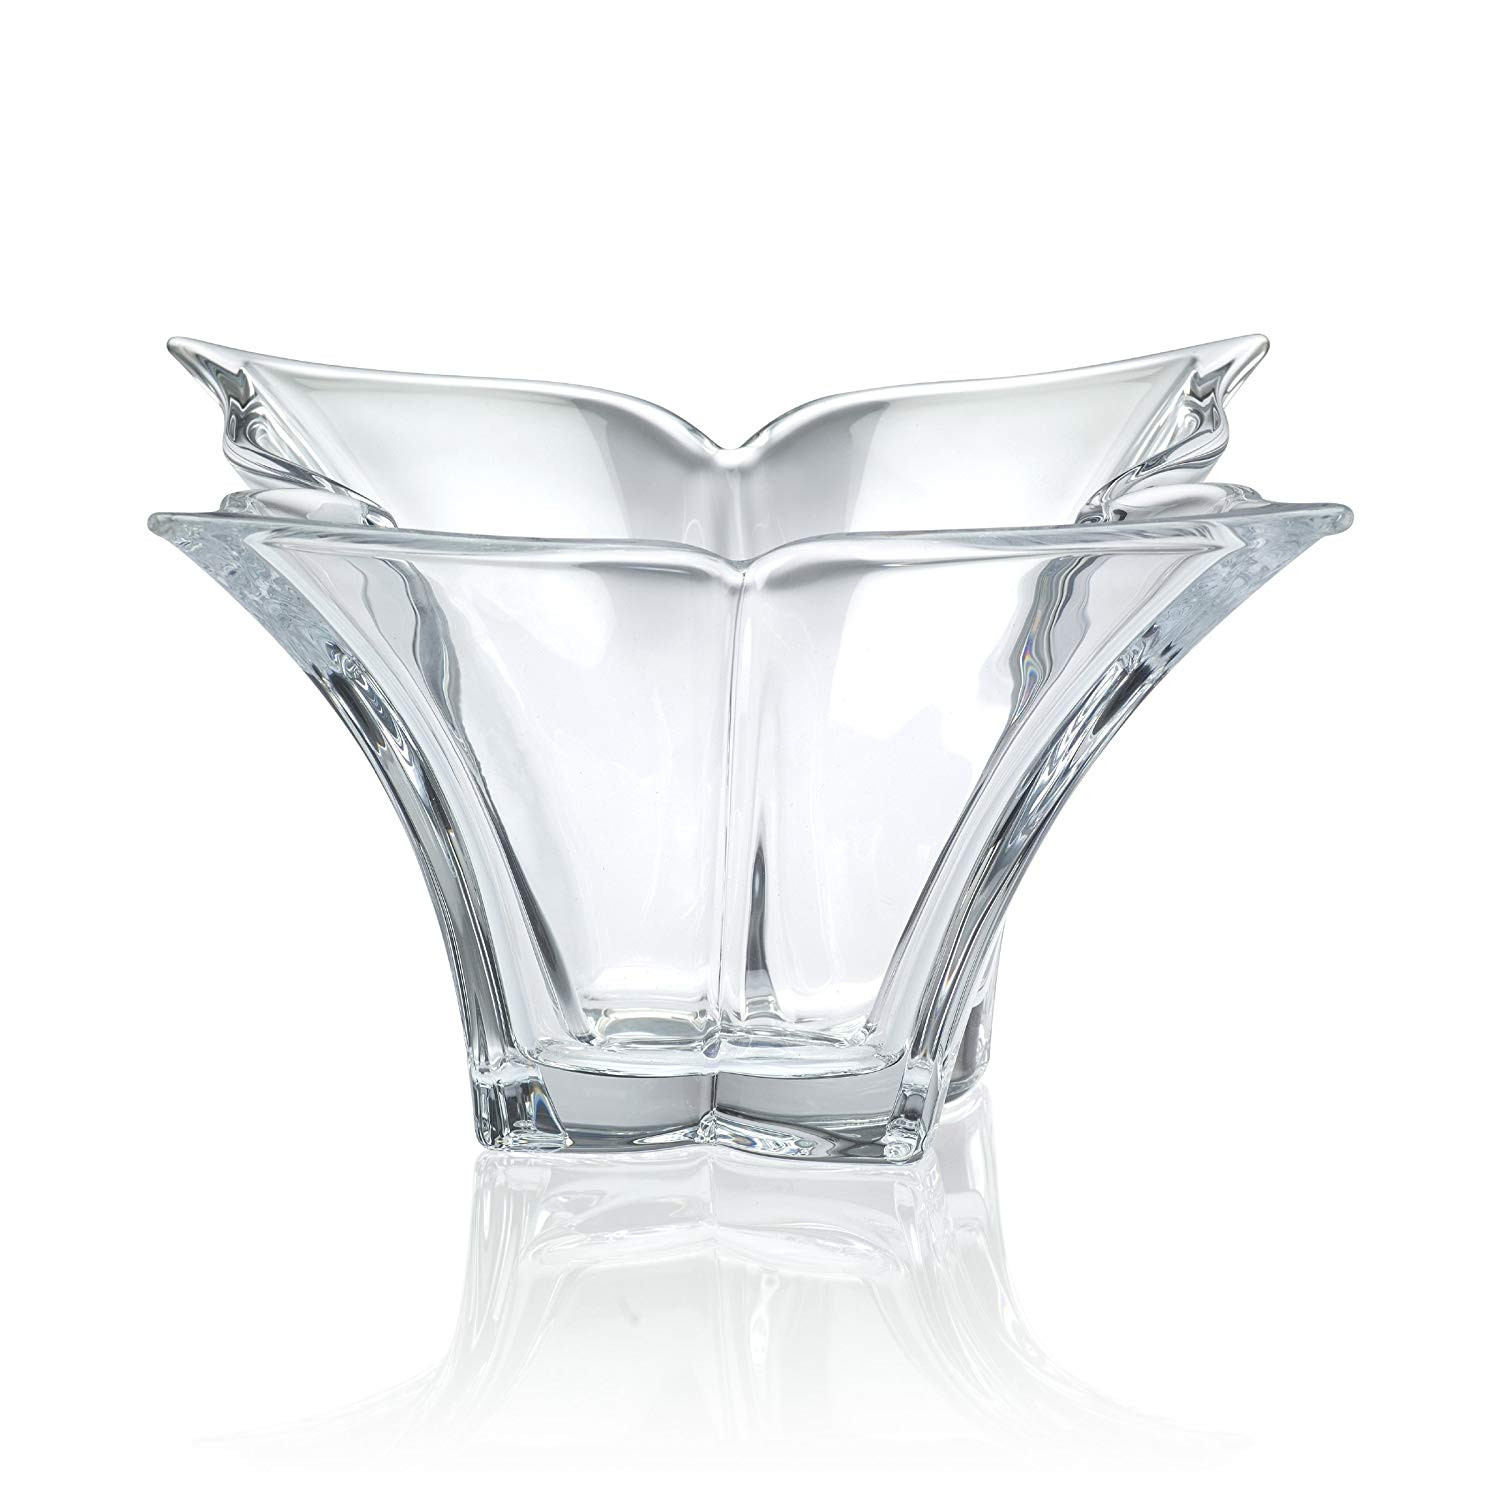 20 attractive Mikasa Florale Crystal Vase 2022 free download mikasa florale crystal vase of amazon com mikasa crystal florale bowl 14 inch home kitchen with 81h8 eaqorl sl1500